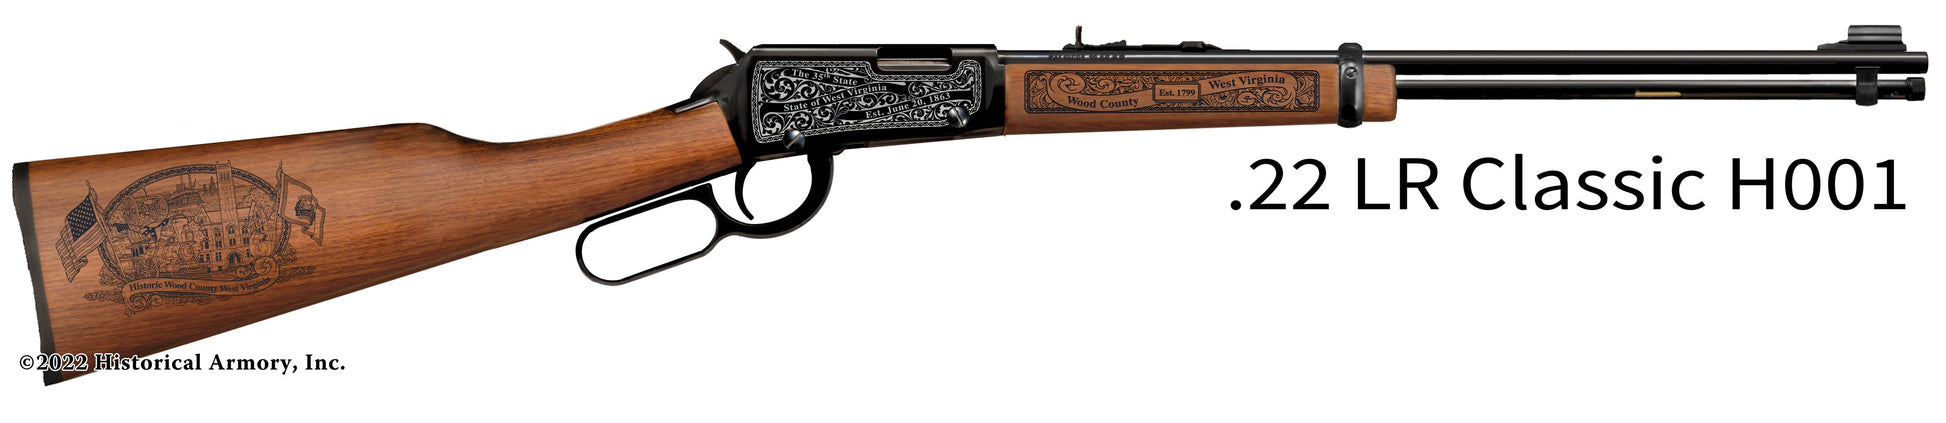 Wood County West Virginia Engraved Henry H001 Rifle